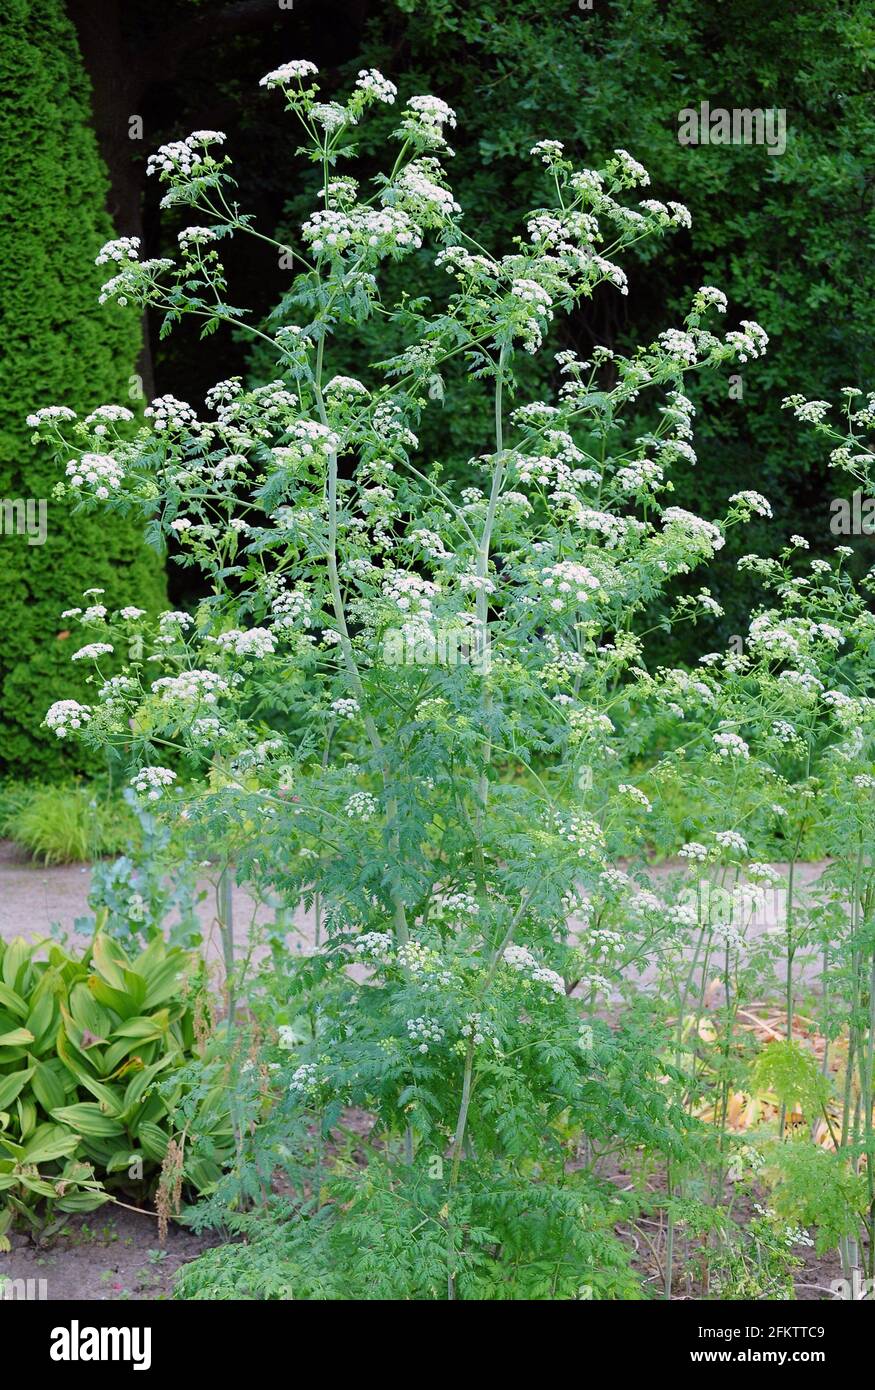 Poison hemlock (Conium maculatum) is a poisonous biennial plant native to Europe and northern Africa. Stock Photo